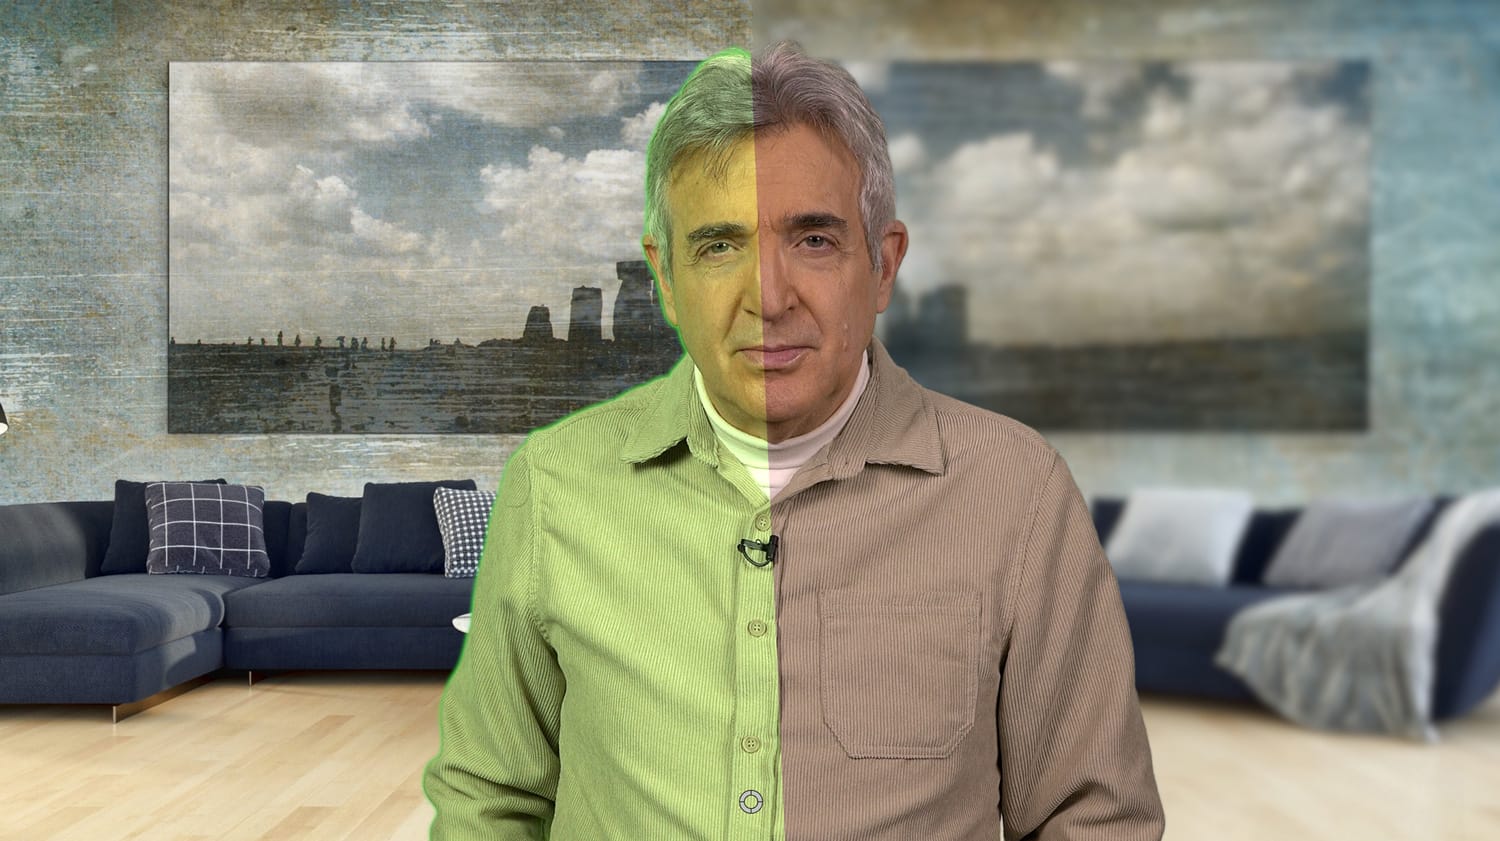 The Green Screen Technique That Will Transform All Your Videos From This Day Forward: Meet Chroma Fusion